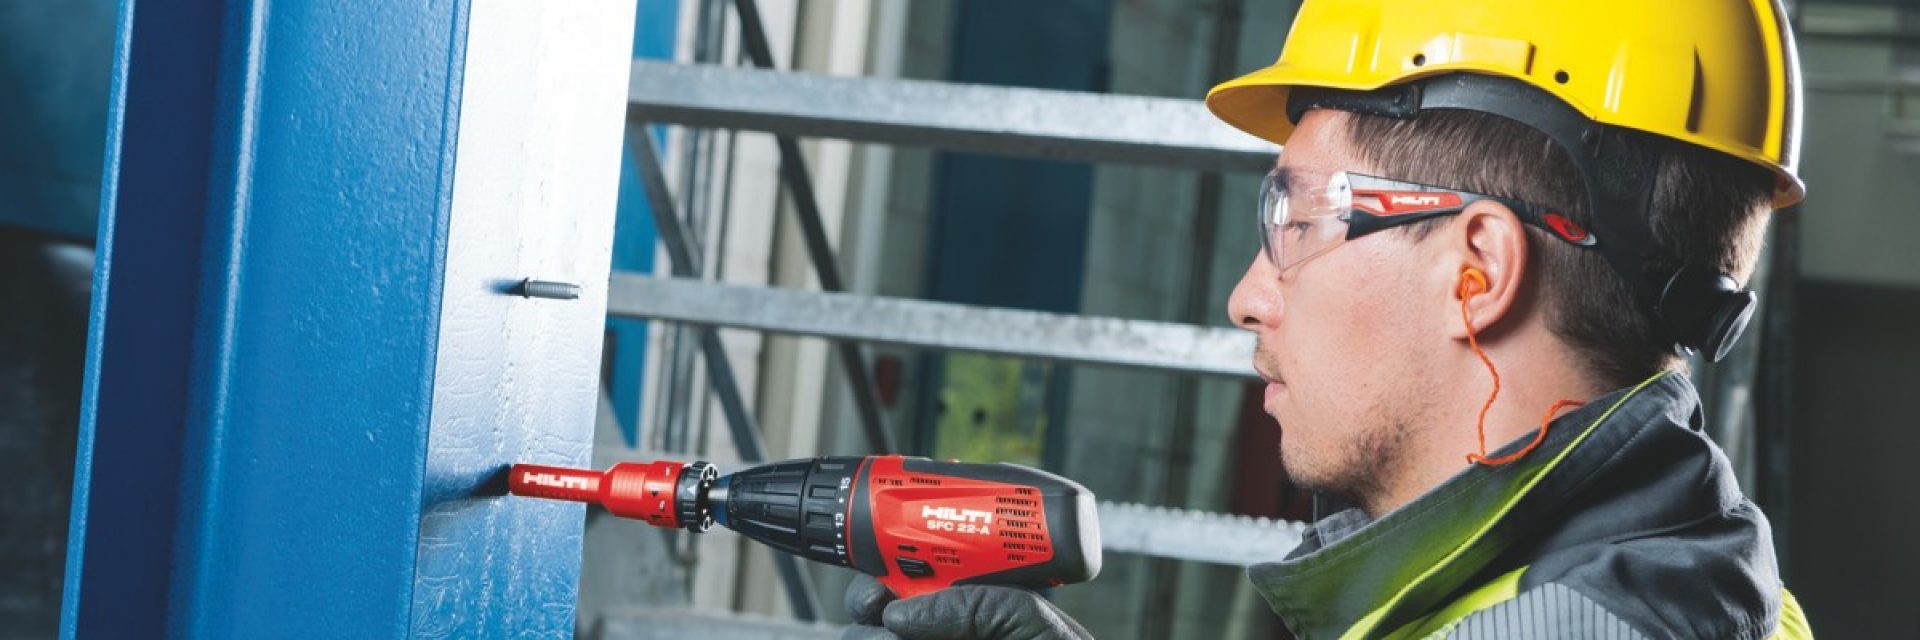 Hilti fastening solutions for fastening electrical equipment to steel